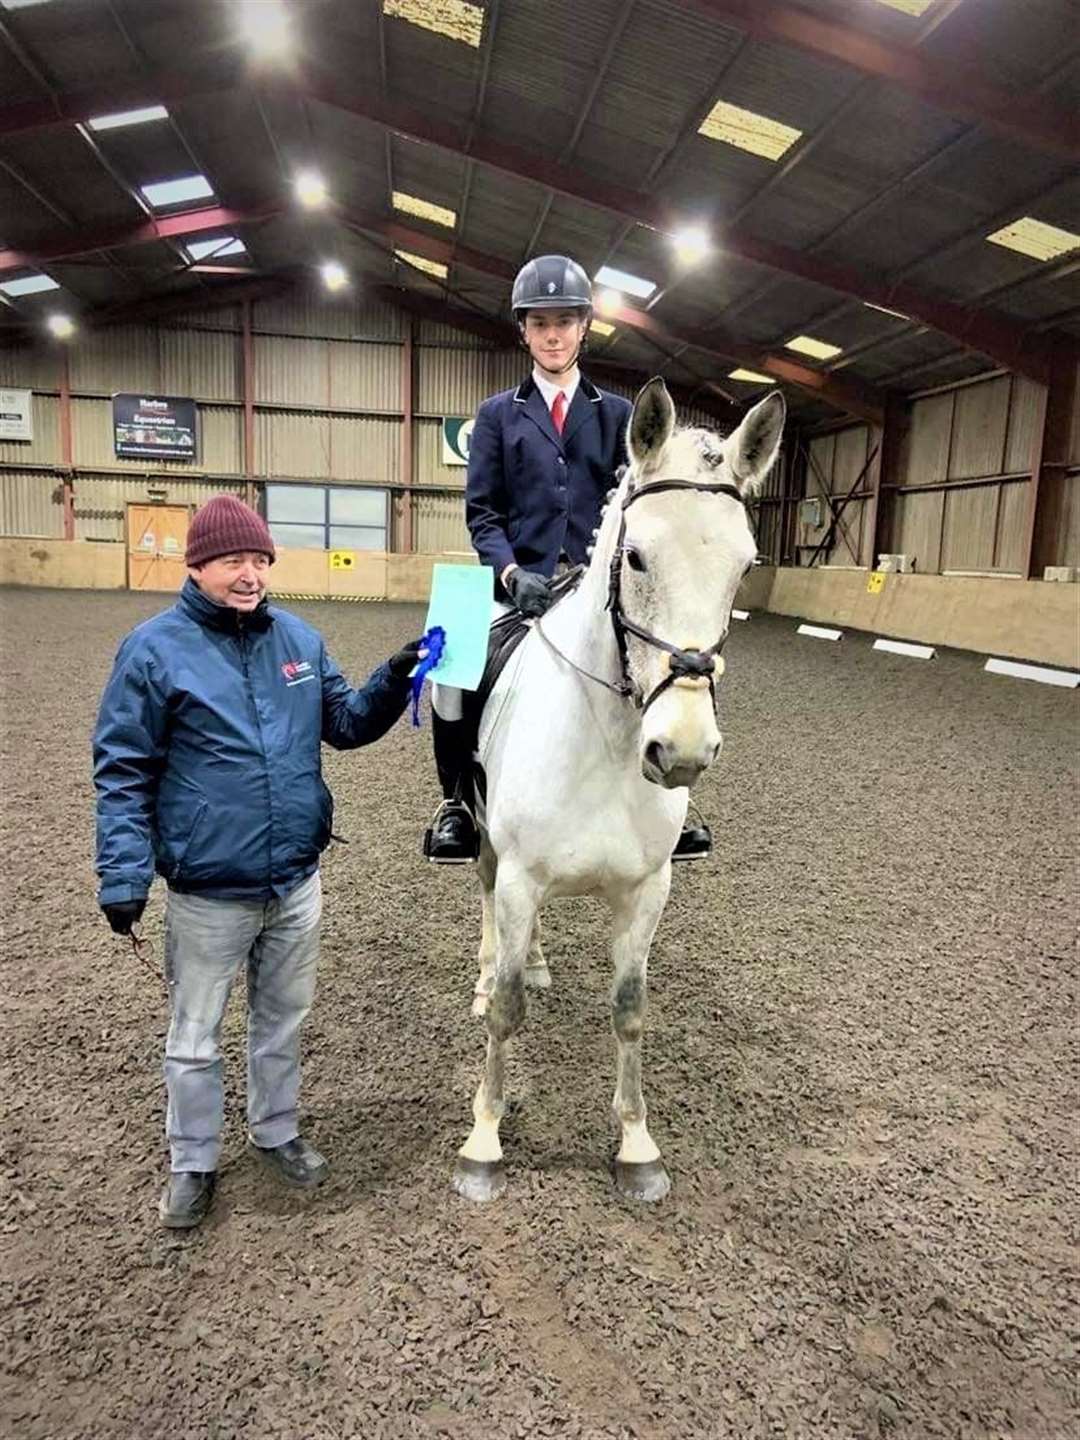 Dressage judge Stephen Cruickshank presents Liam Mackenzie with his rosette after he won the grassroots test. Liam had the highest percentage of the day and qualified in both of his tests for the Barrier Spring Festival with Wee Vintage Annie.